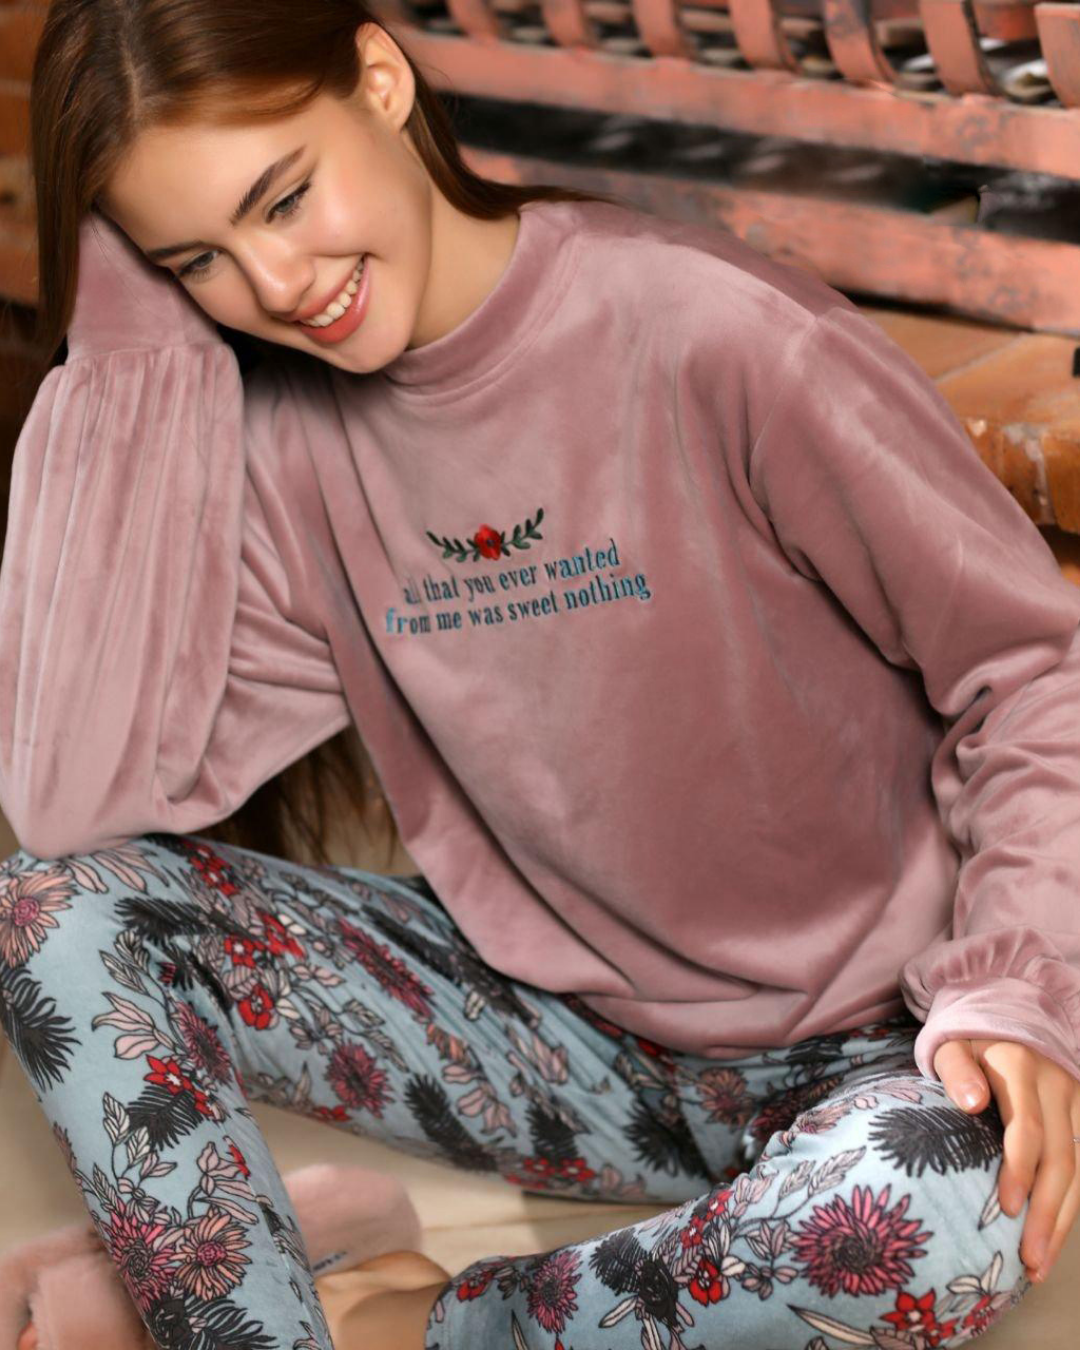 all that you ever wanted Women's pajamas with a rose print on the chest